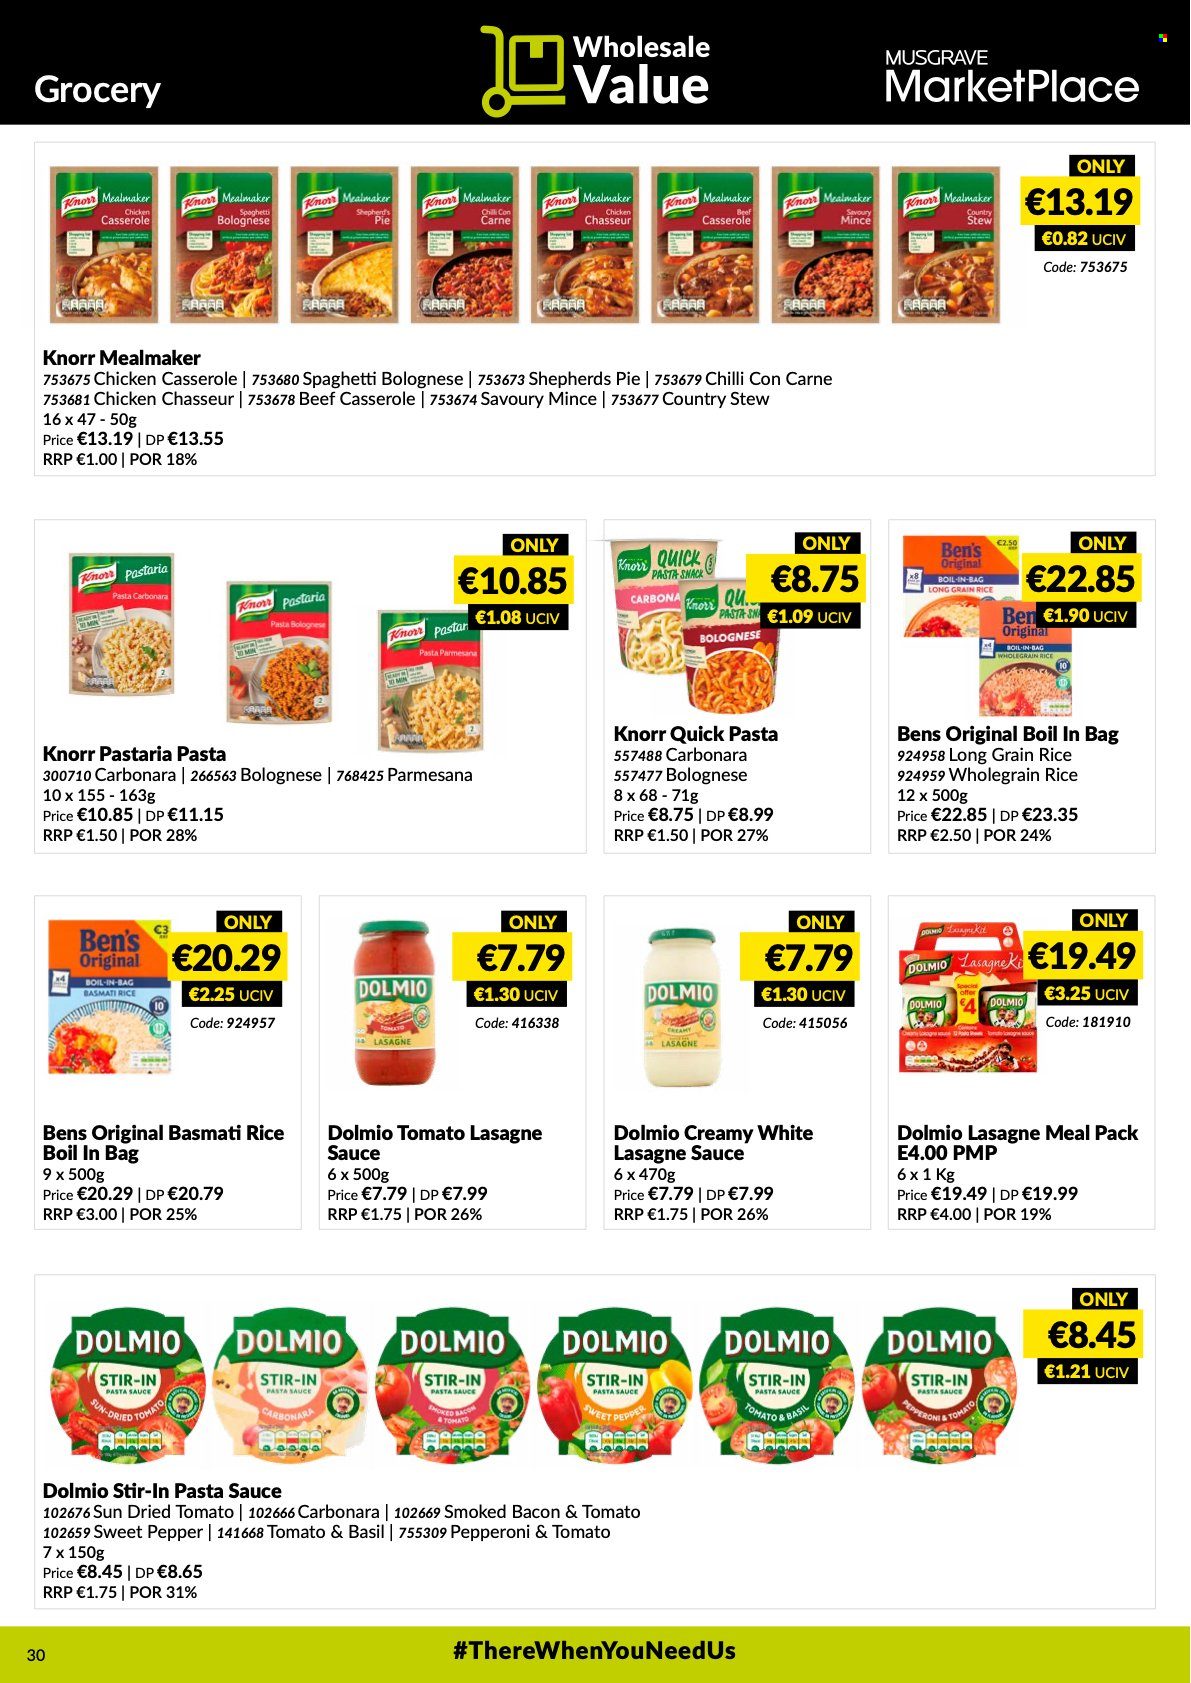 thumbnail - MUSGRAVE Market Place offer  - 16.01.2022 - 12.02.2022 - Sales products - pie, spaghetti, pasta sauce, Knorr, sauce, bacon, pepperoni, dried tomatoes, basmati rice, rice, whole grain rice, long grain rice, pepper, Carbona, casserole. Page 30.